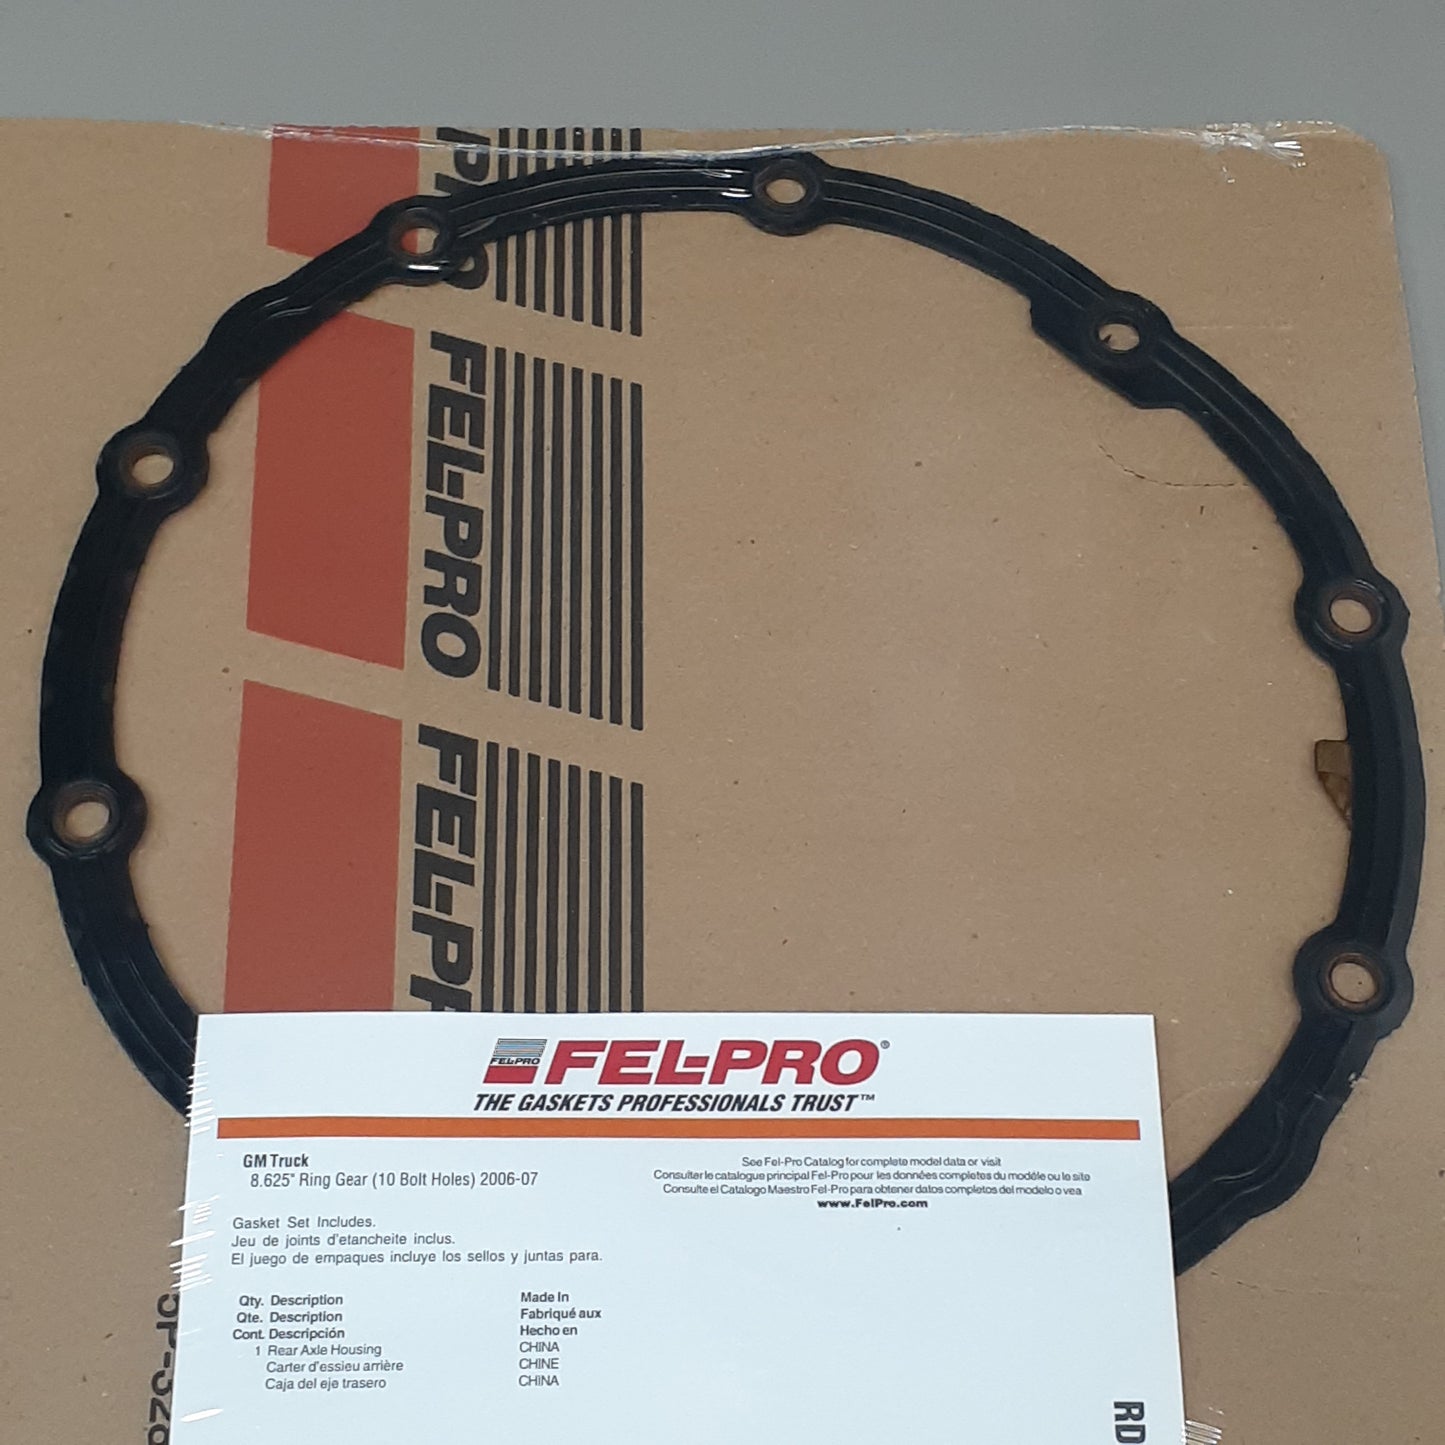 FEL-PRO Axle Hsg. Cover or Diff. Seal RDS55480 (New)